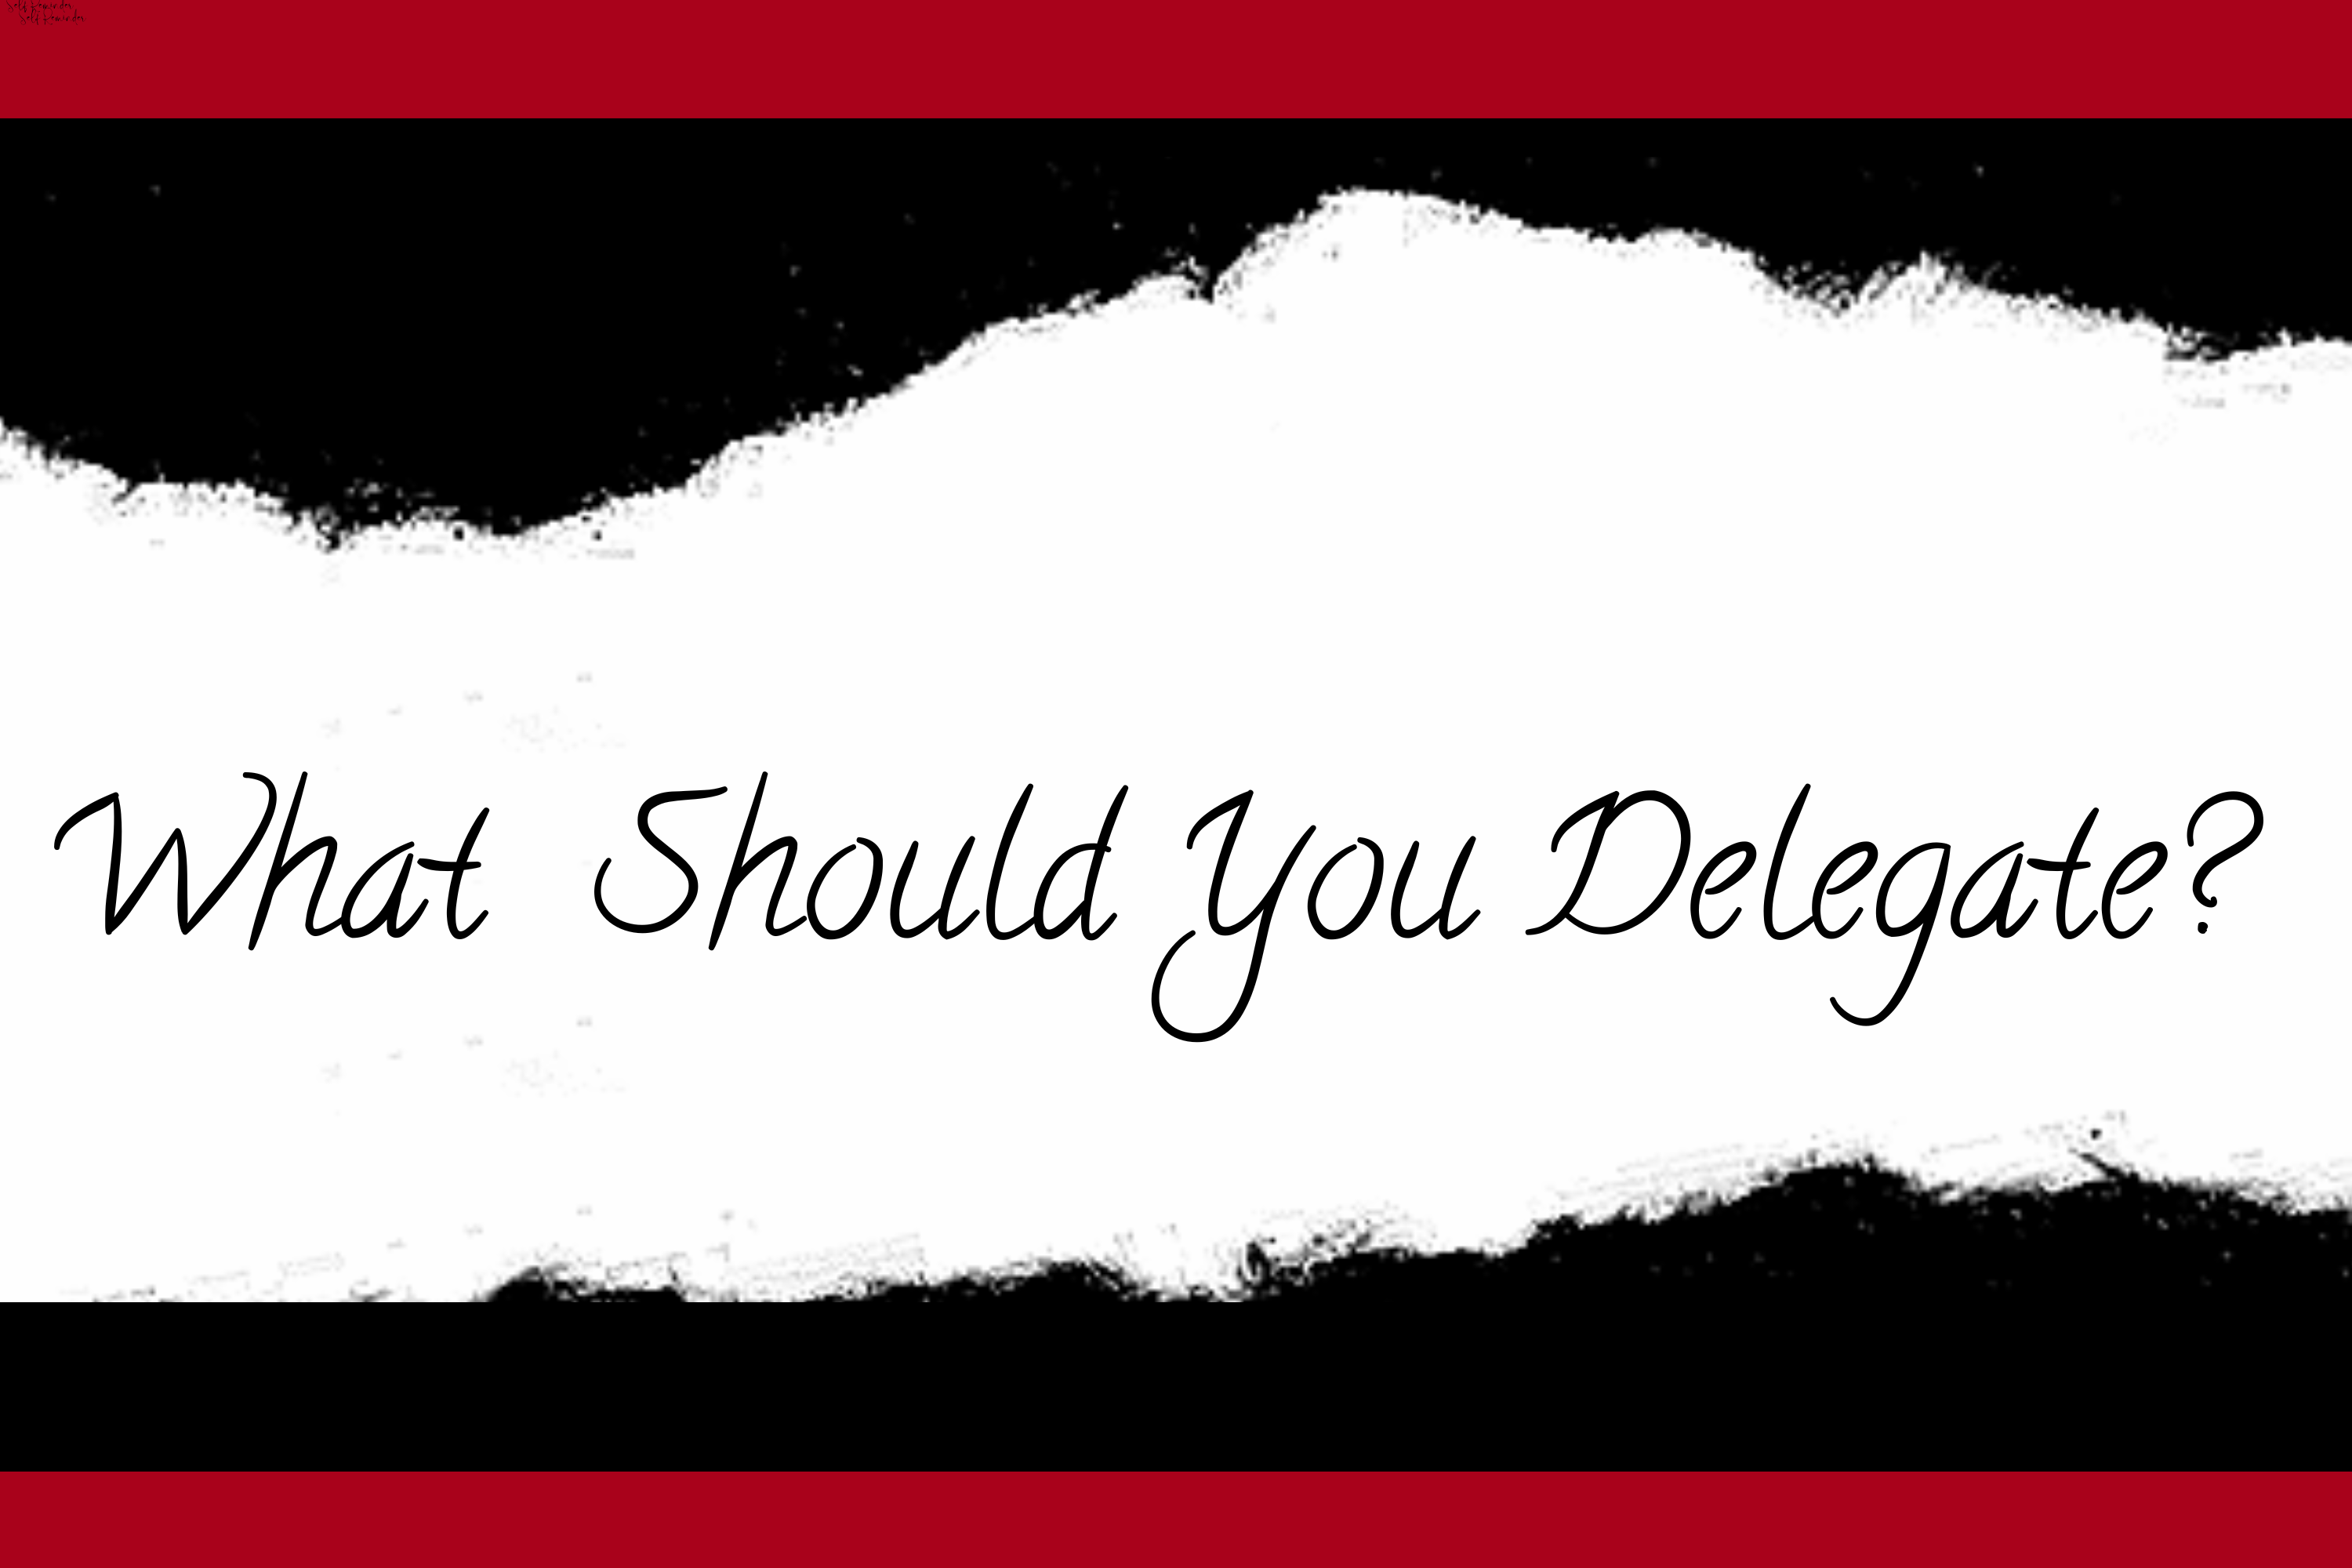 What should you delegate?